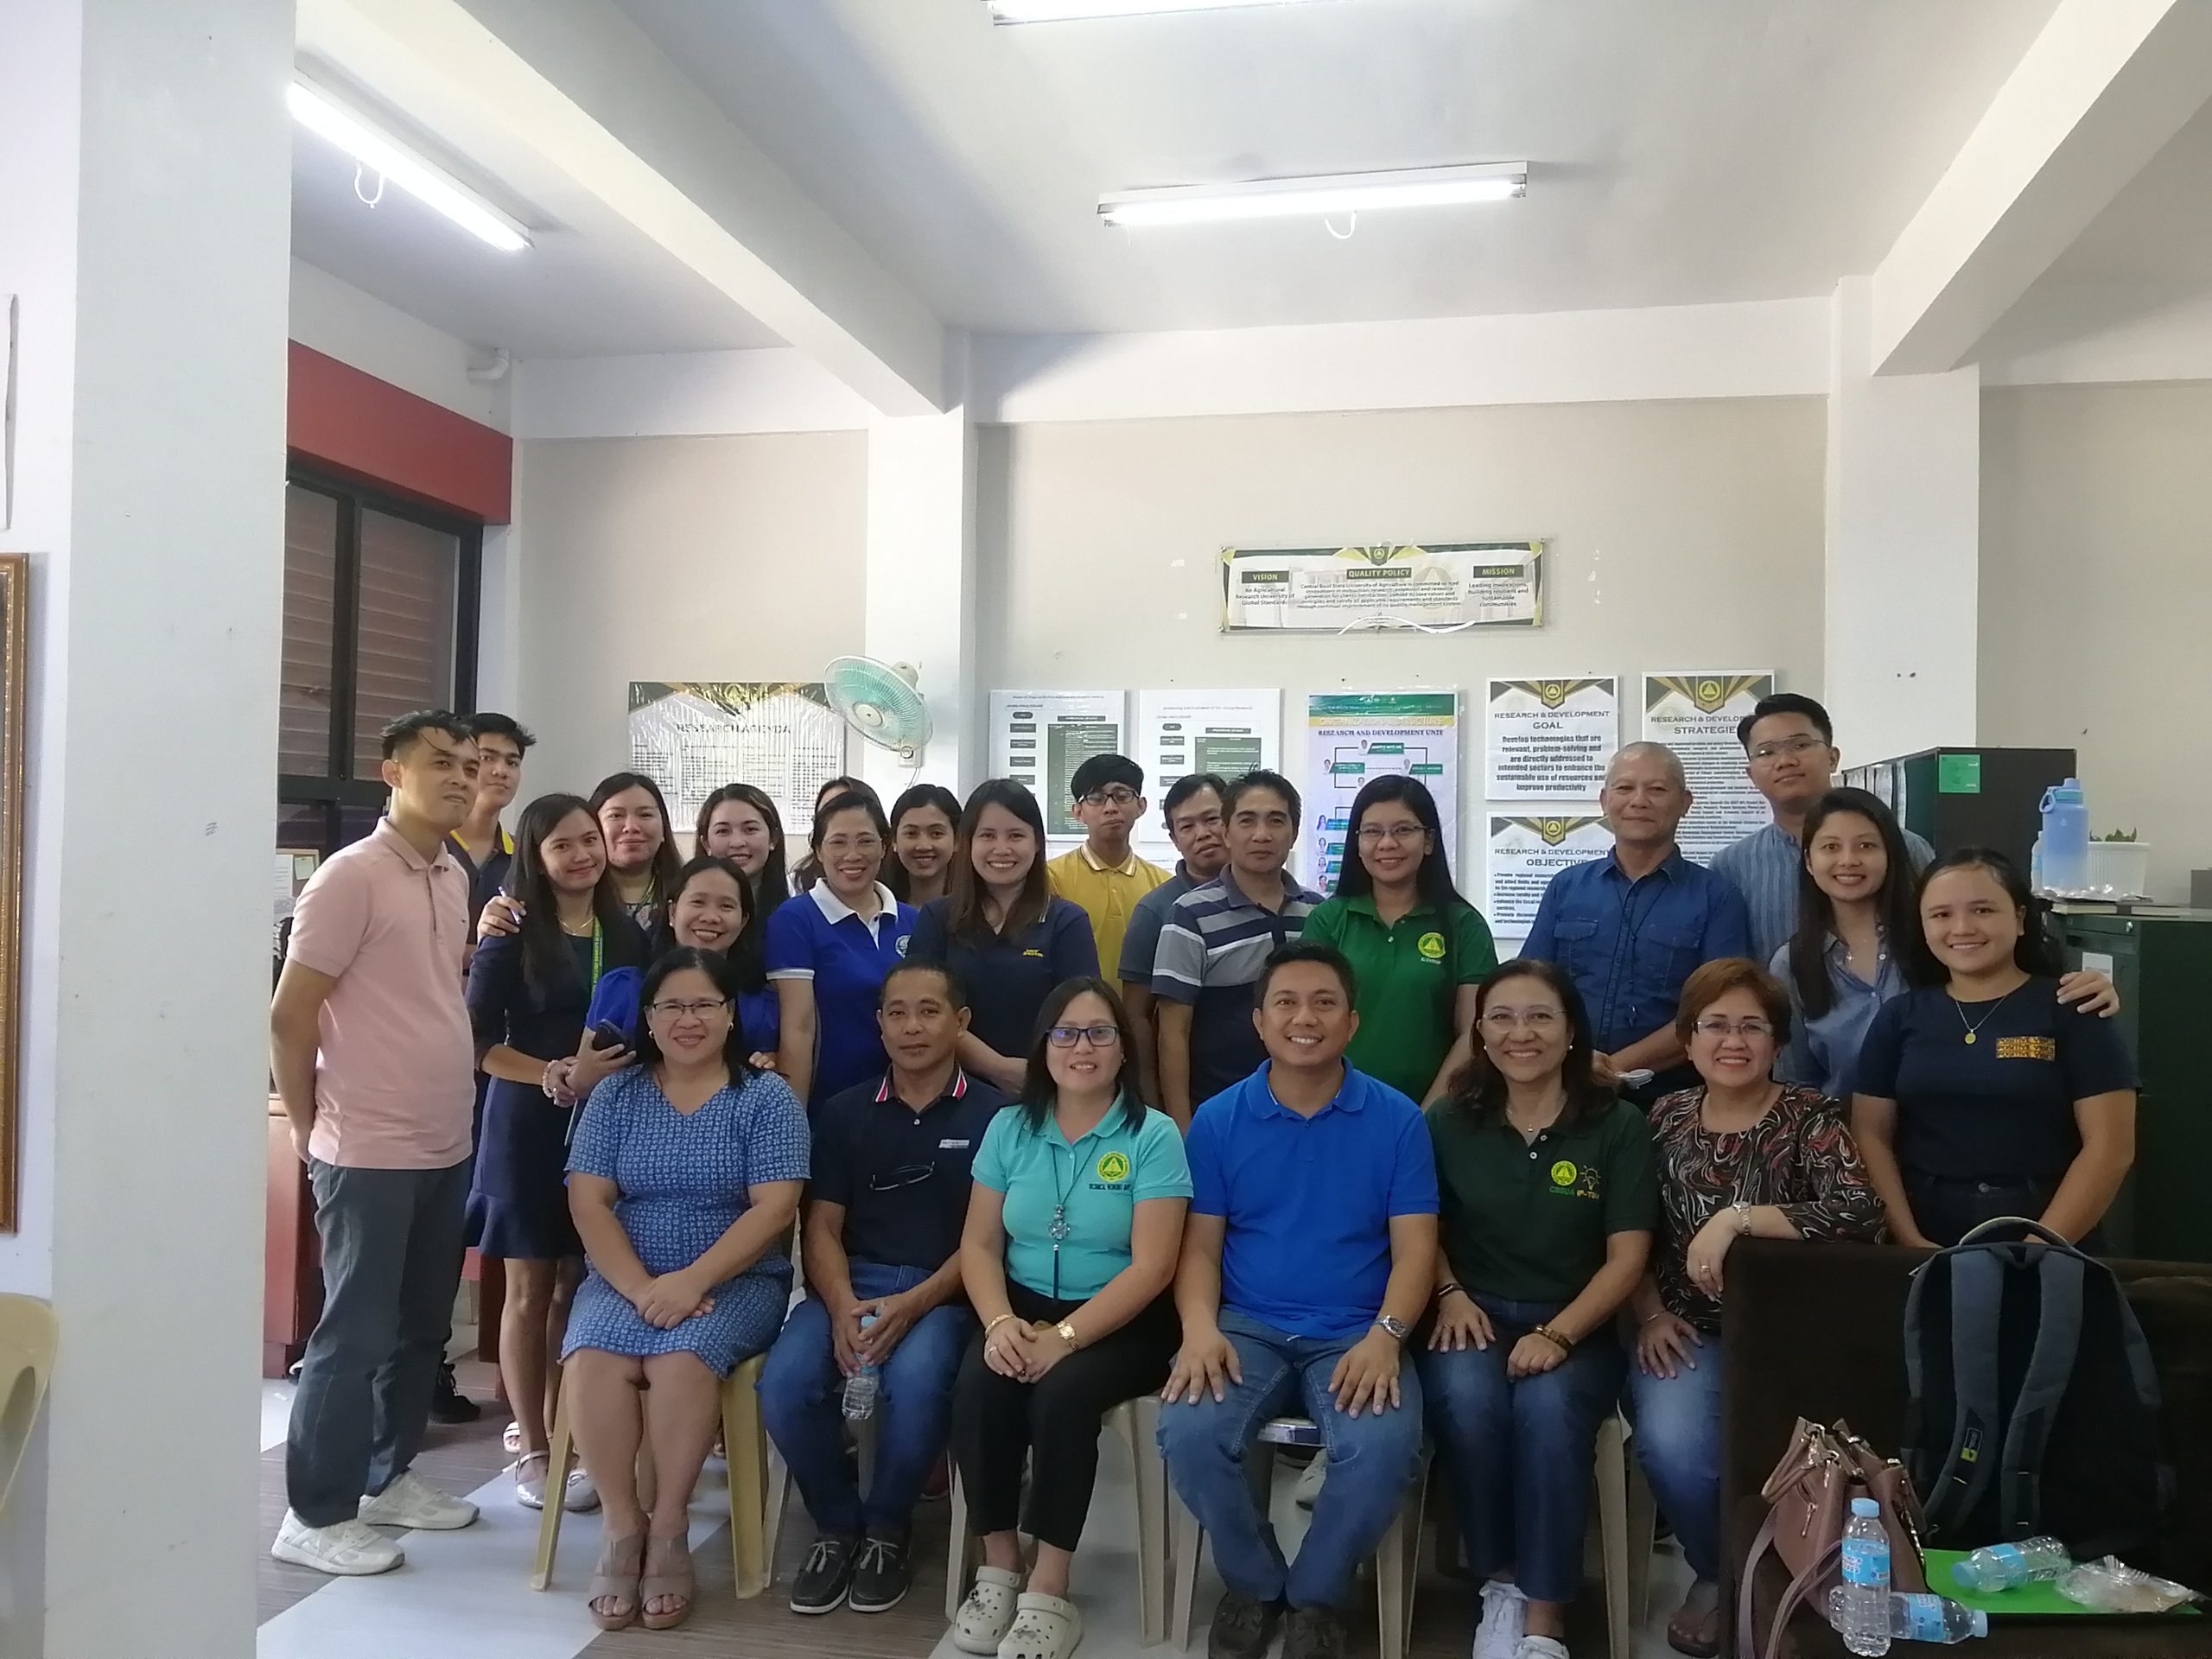 OVPRI CONDUCTS UNIVERSITY-WIDE RESEARCH AND TECHNOLOGY COMMERCIALIZATION PROTOCOLS RE-ORIENTATION IN SIPOCOT CAMPUS